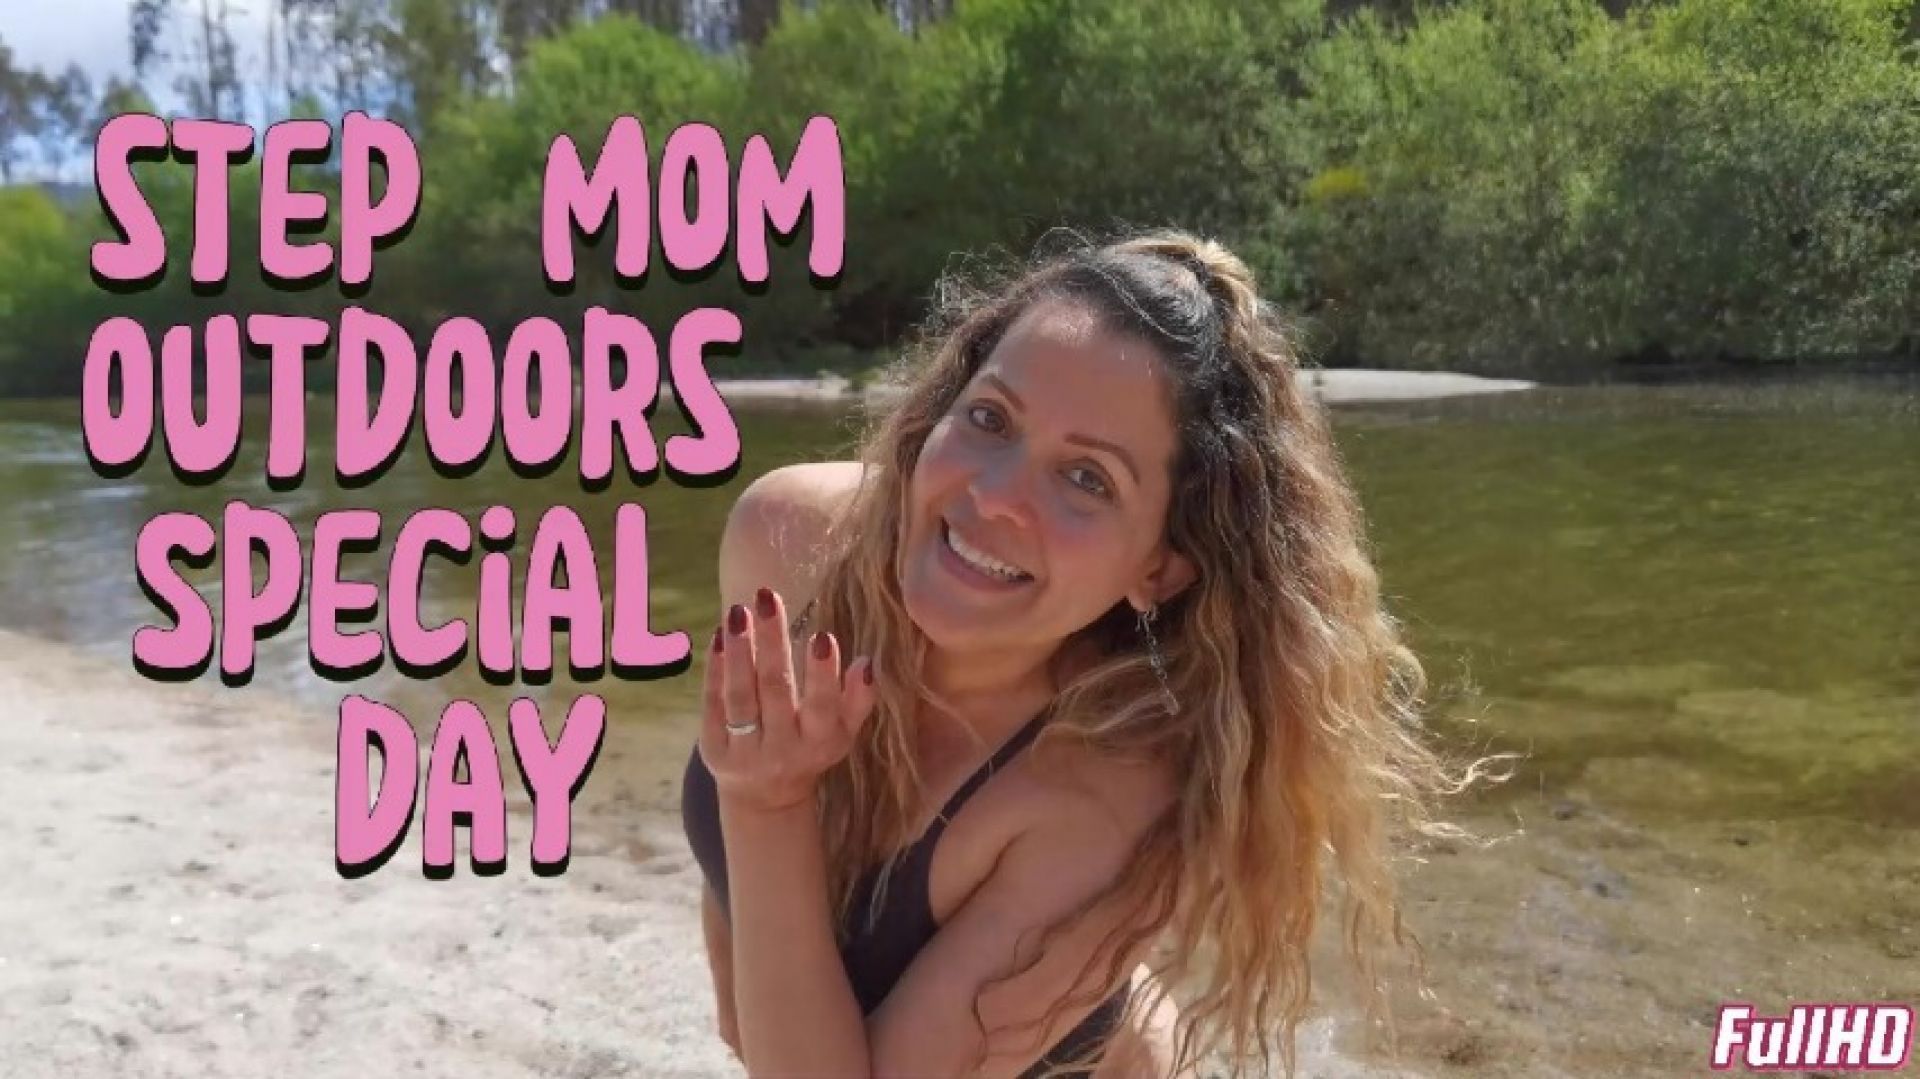 The Special Day Outdoors with Step Mom